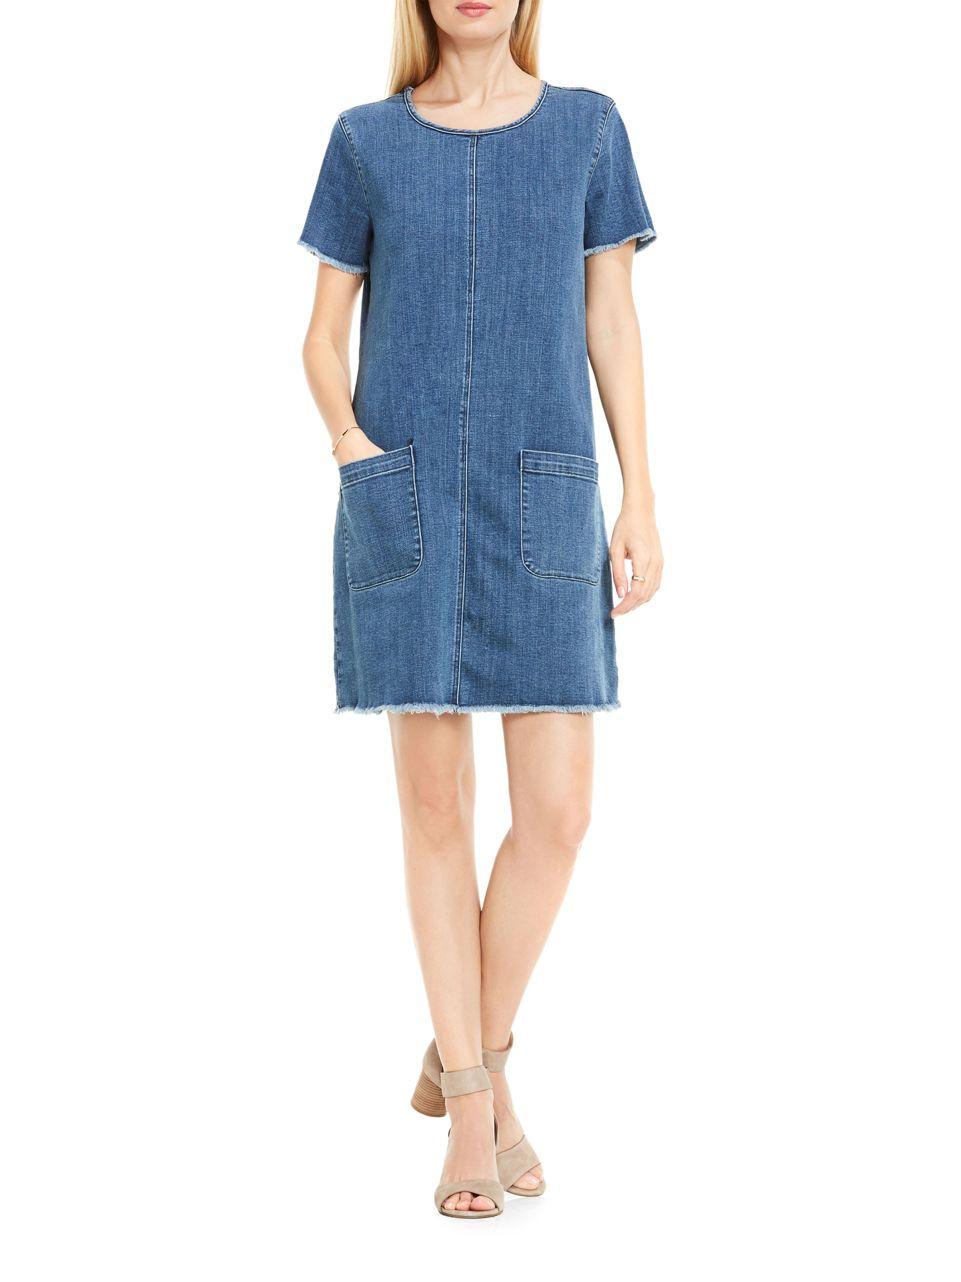 Lyst - Two by vince camuto Frayed Shift Dress in Blue